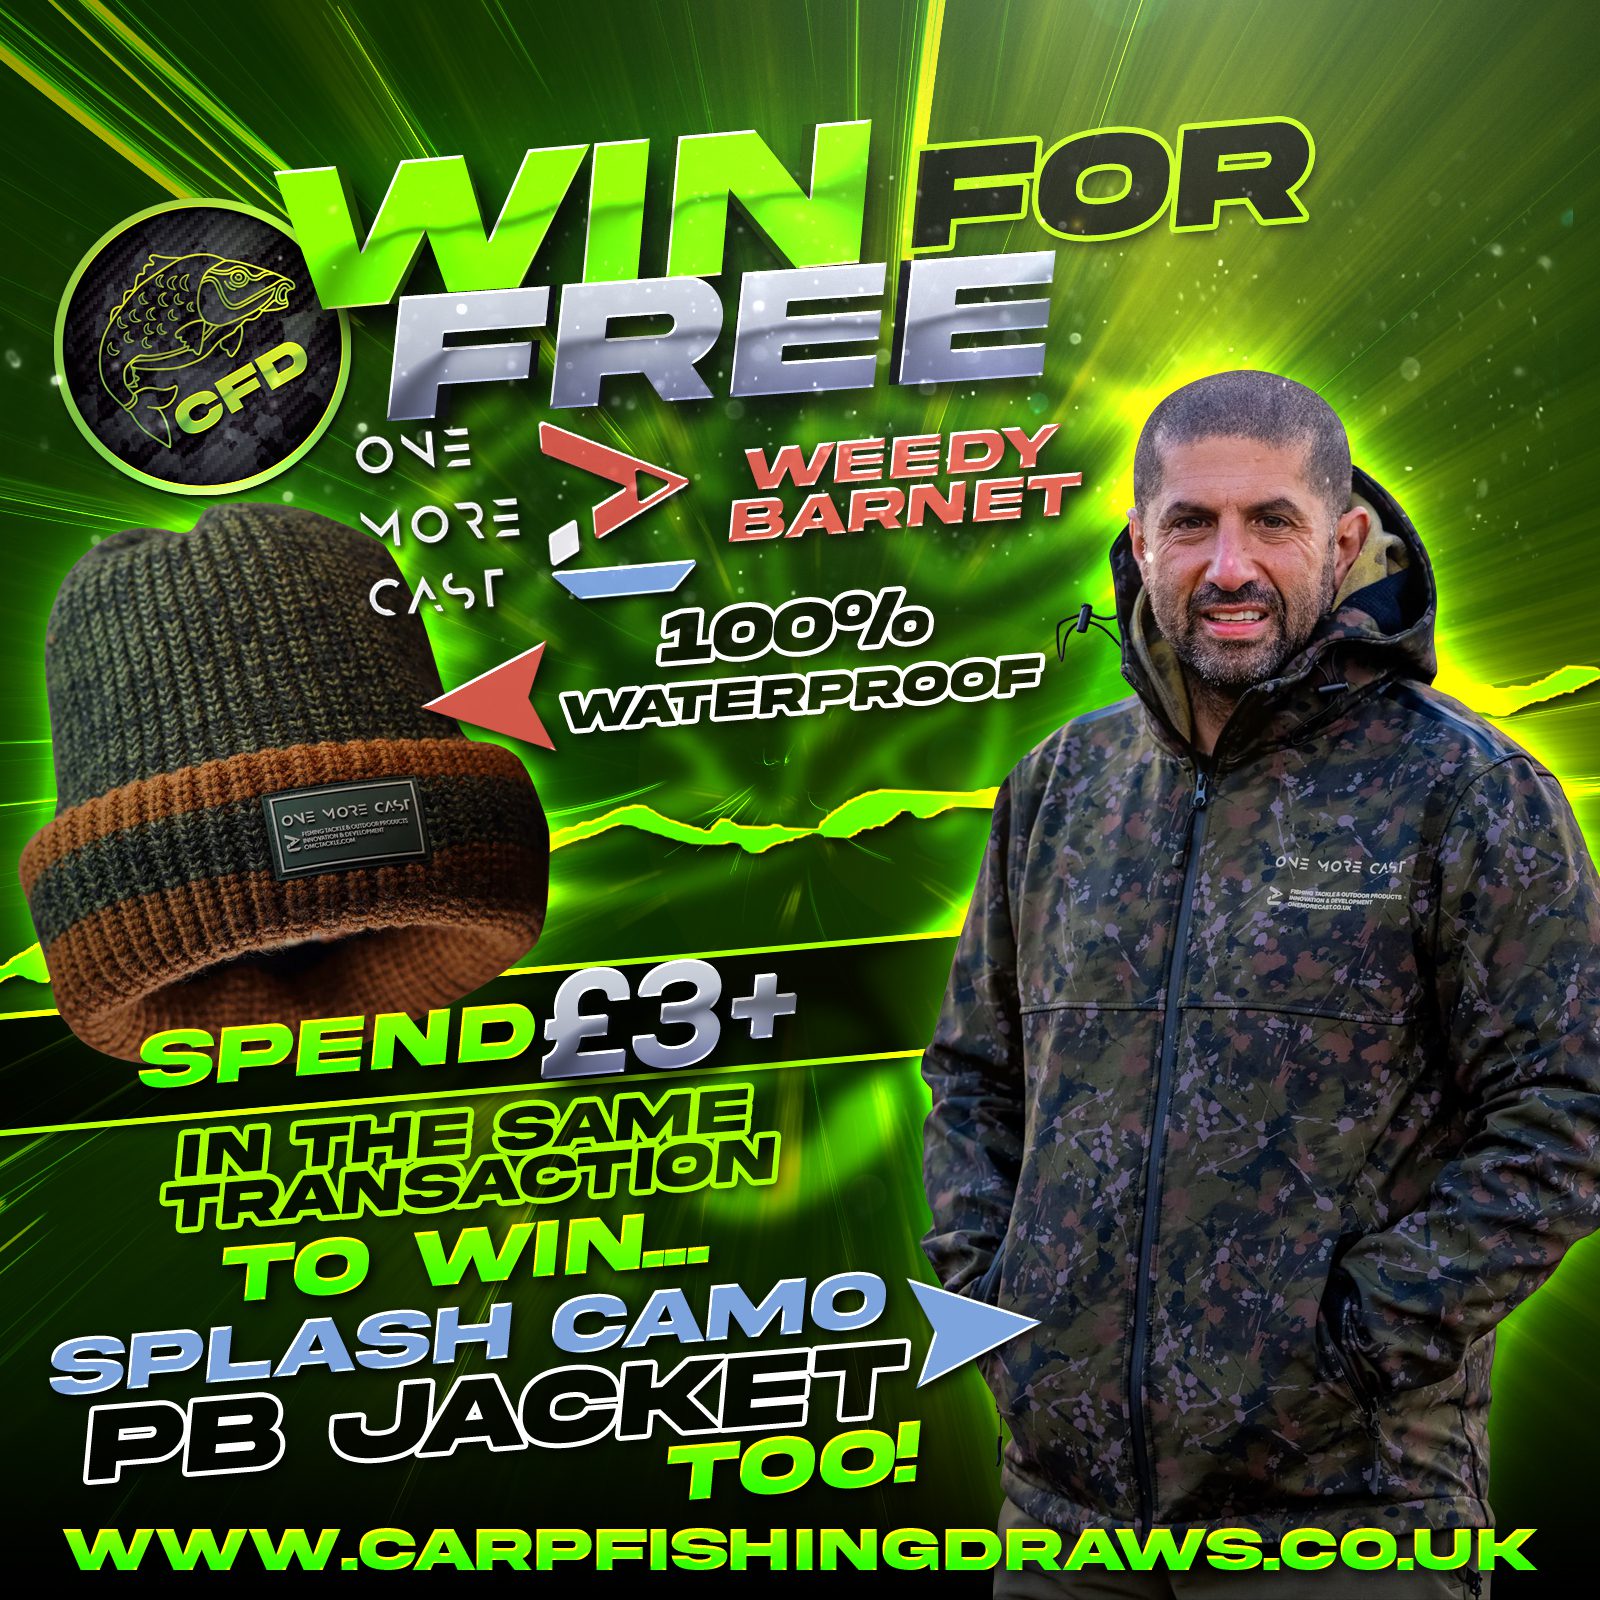 FREE ENTRY DRAW – Spend £3+ to win both! – Carp Fishing Draws